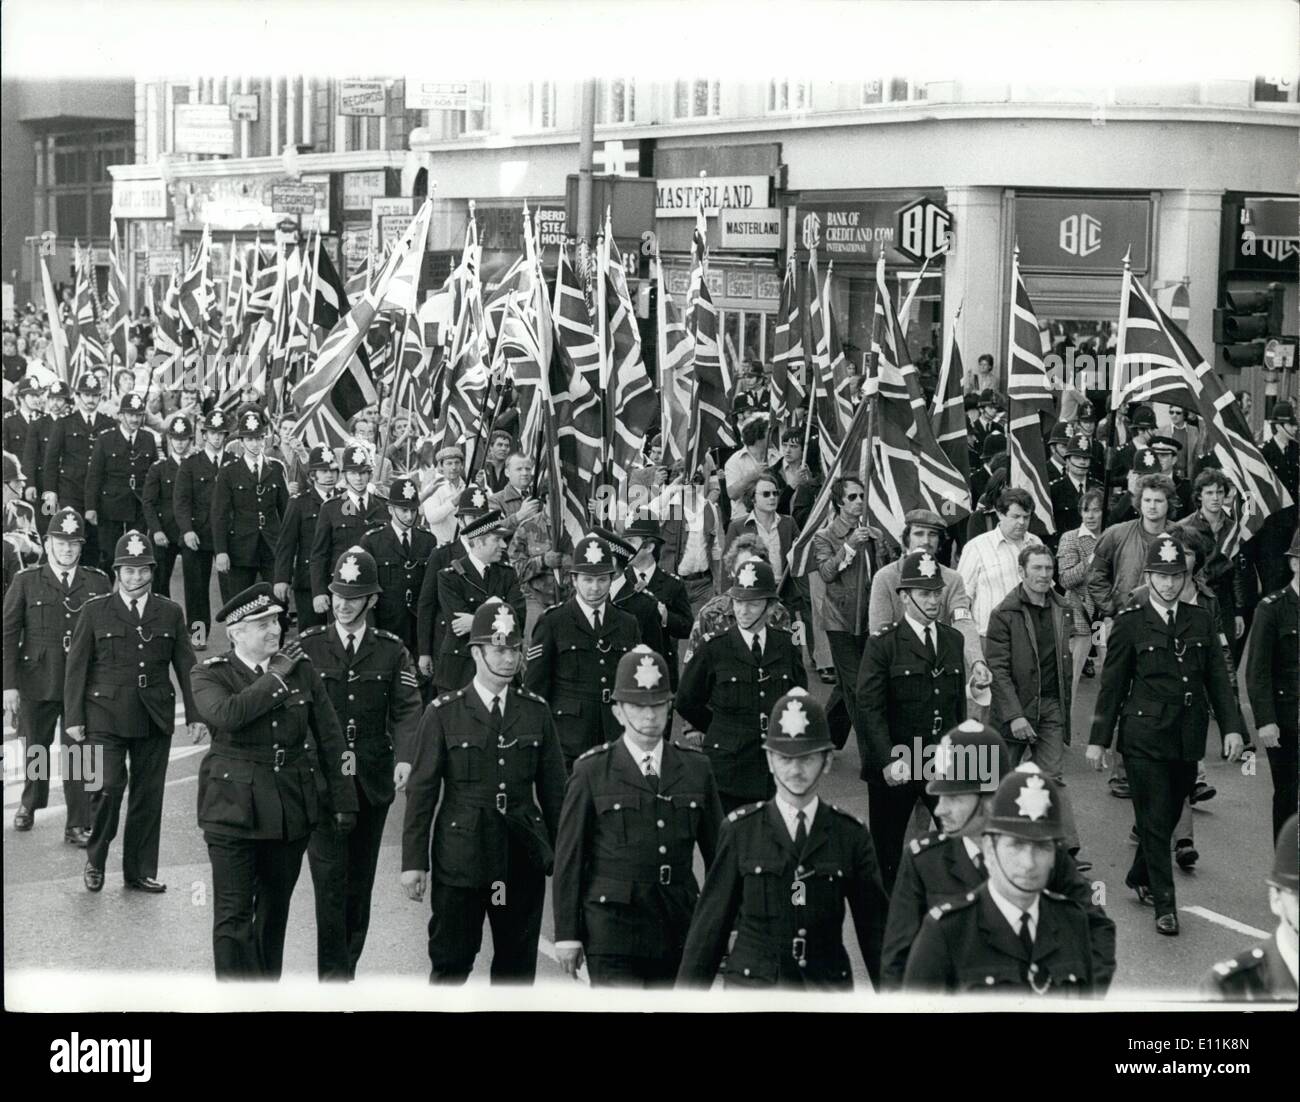 Sep. 09, 1978 - National Front And Anti-Nazi League March In London: Police marching in strength with a National Front procession in Charing Cross Road yesterday to ward off any confrontation with Anti-Nazi league demonstrators held a march at the same time. The Front supporters, led by Martin Webster (in white), were on their way to Shoreditch. The Anti-Nazi League held a meeting in Hyde Park before marching off to Brixton-the police keeped them well apart. Stock Photo